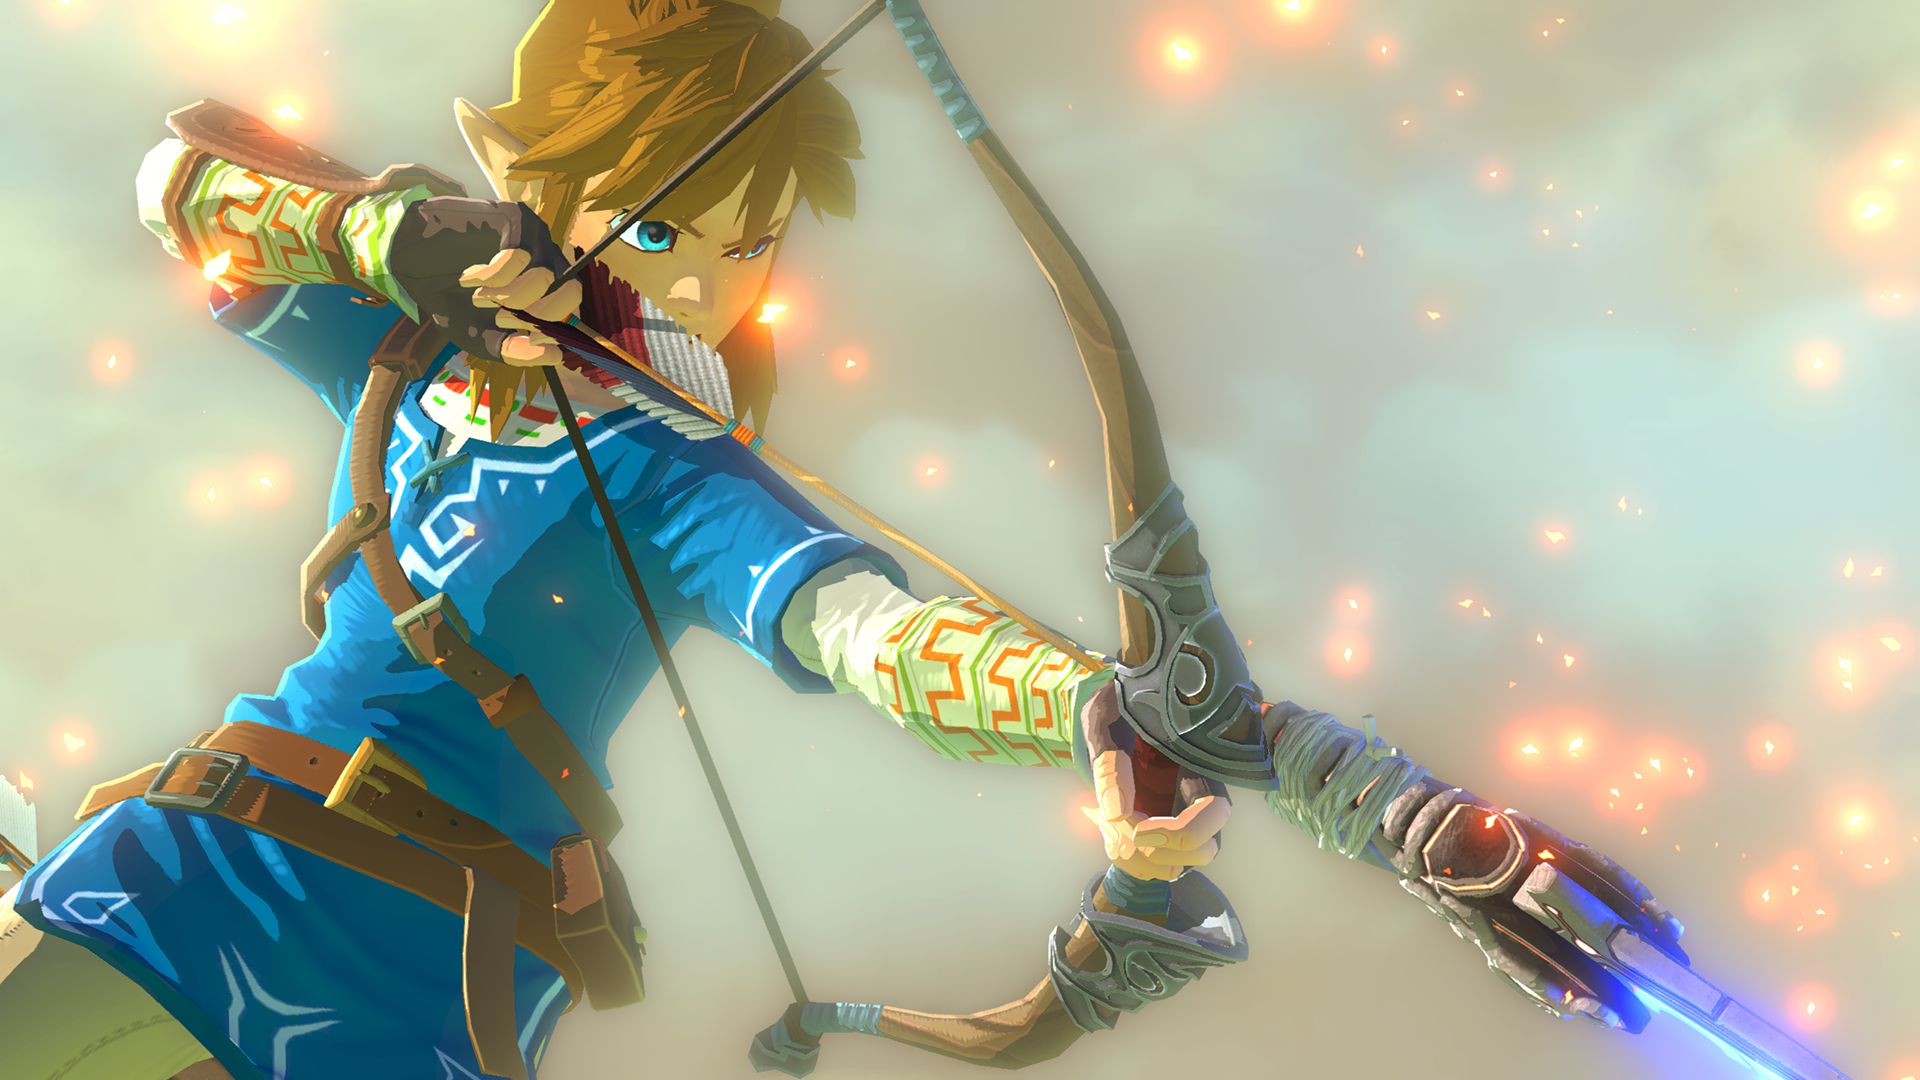 Link aiming an arrow in The Legend of Zelda: Breath of the Wild